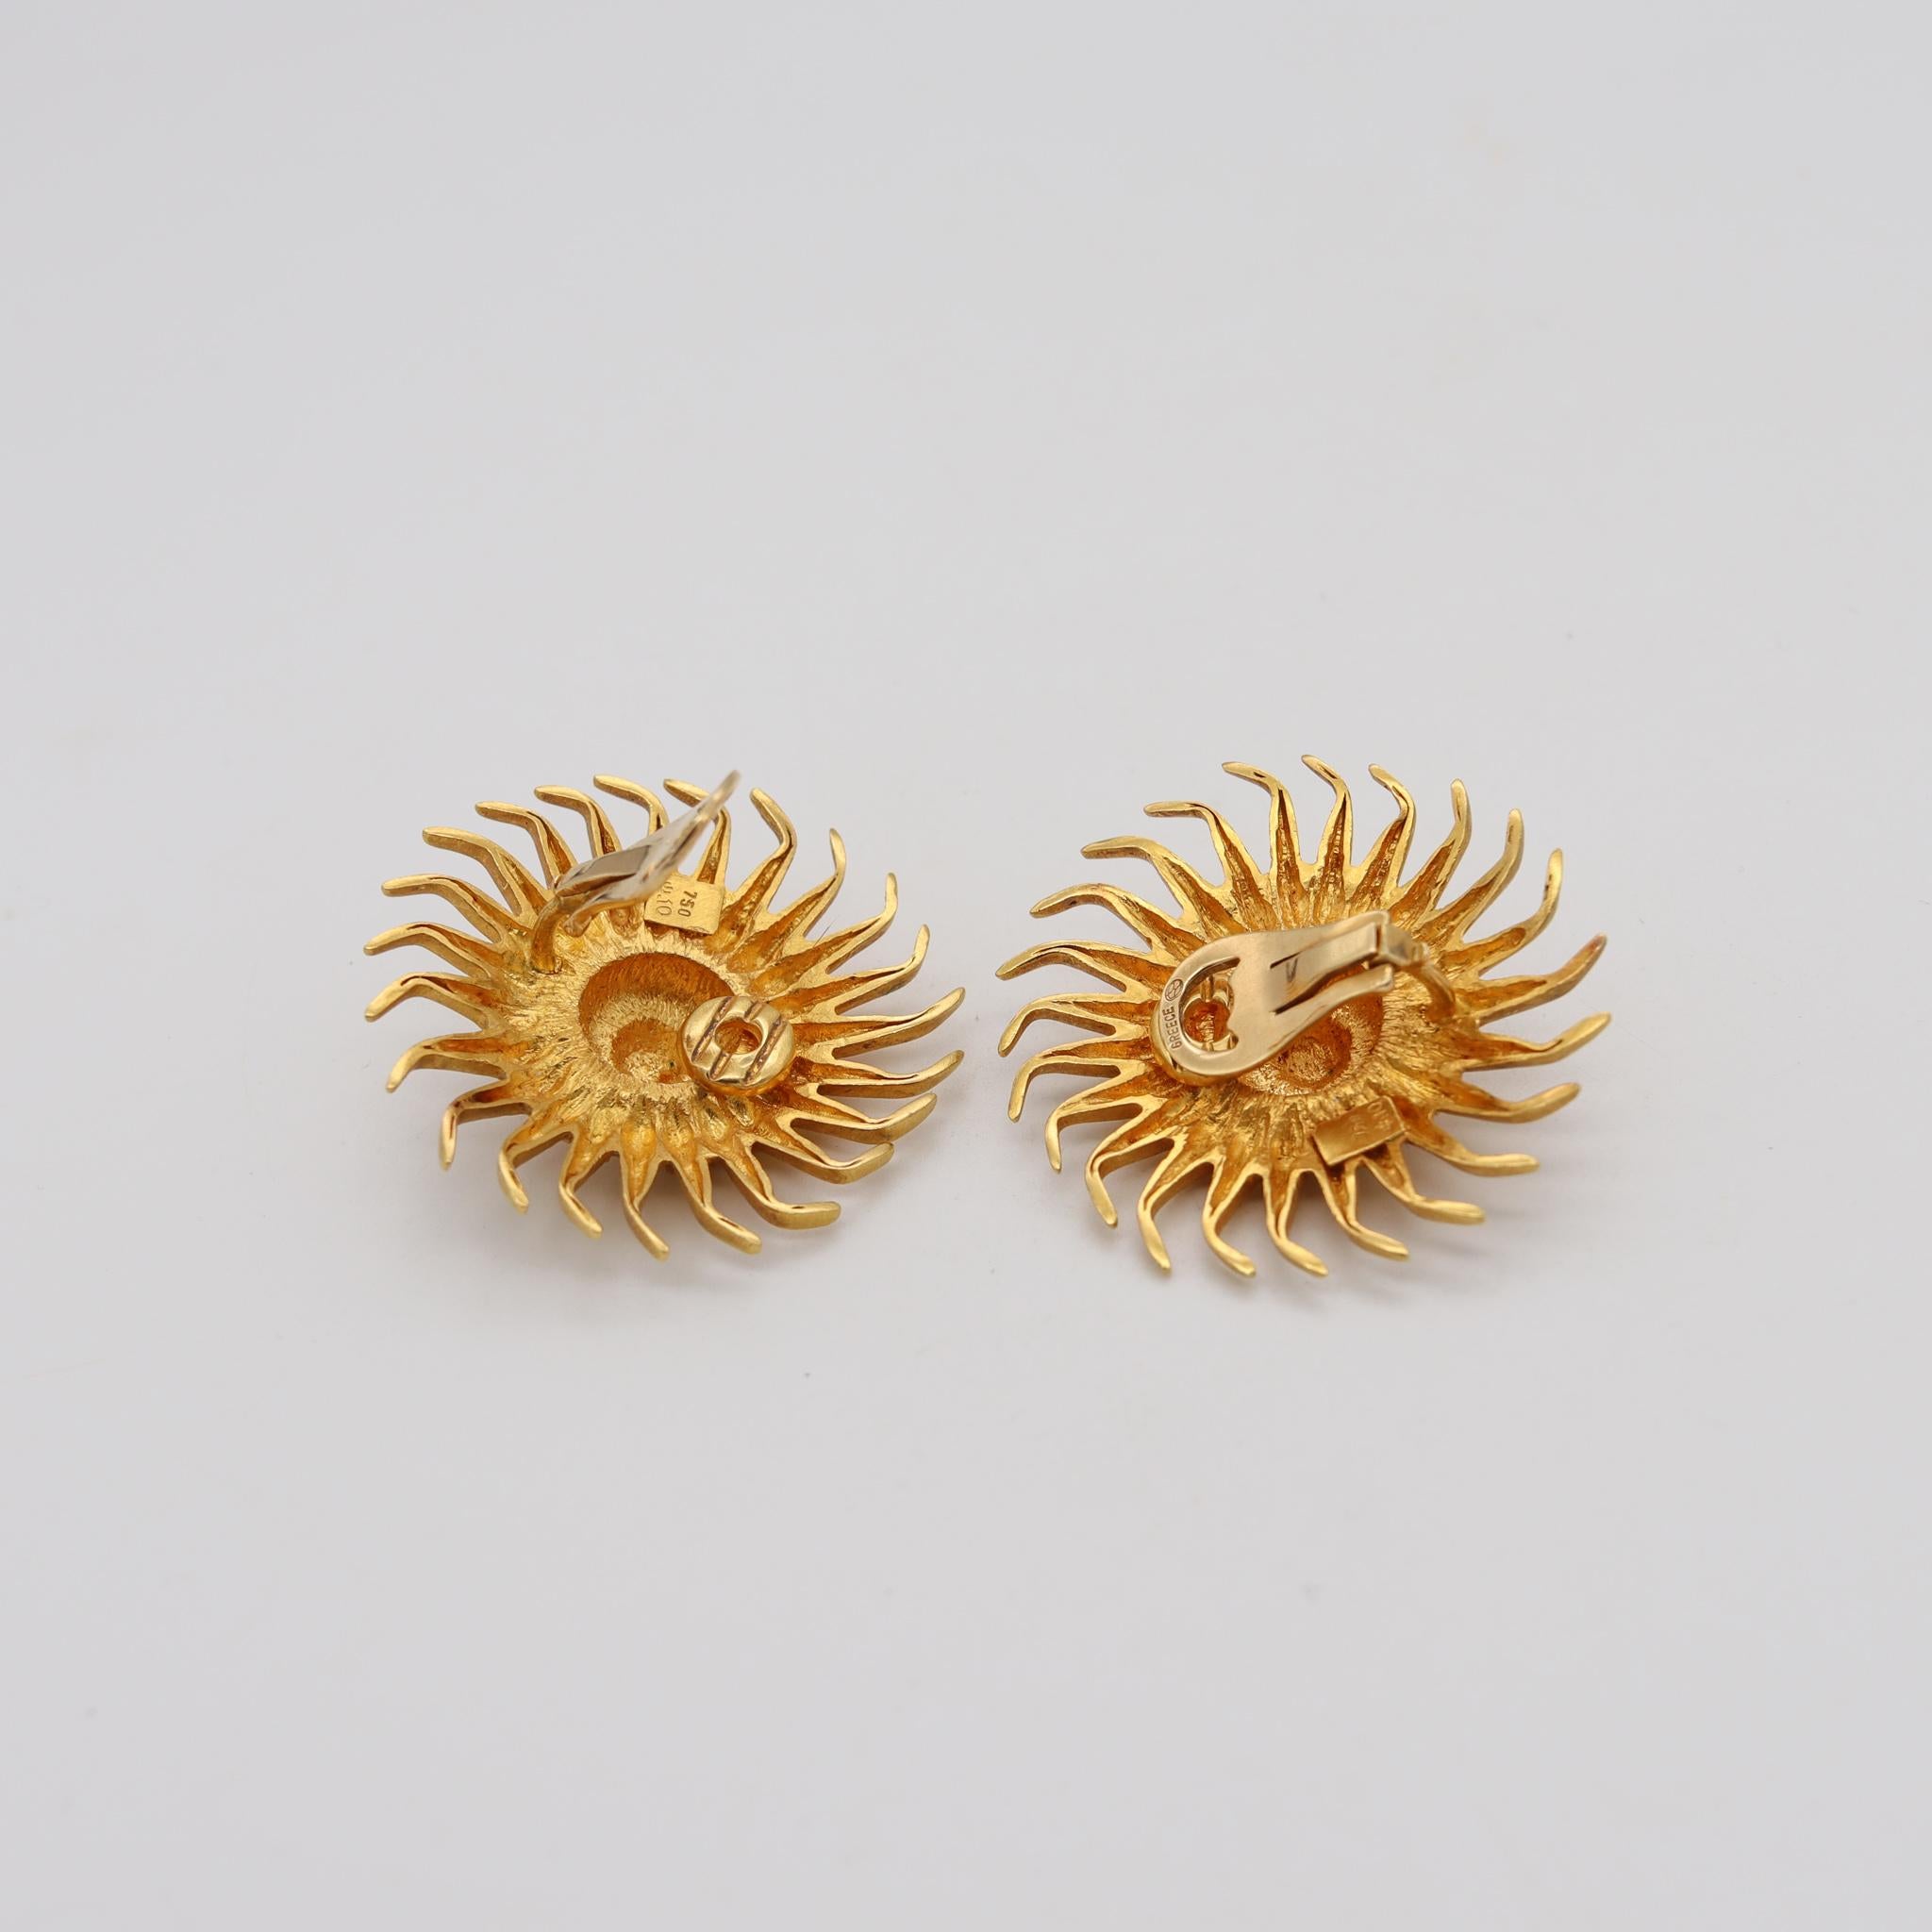 A pair of spiky Earrings designed by Ilias Lalaounis.

Beautiful large geometric pieces, created in Greece by the jewelry house of Lalaounis, back in the 1970's. These gorgeous spiky sun-burst clip earrings has been carefully crafted in solid yellow